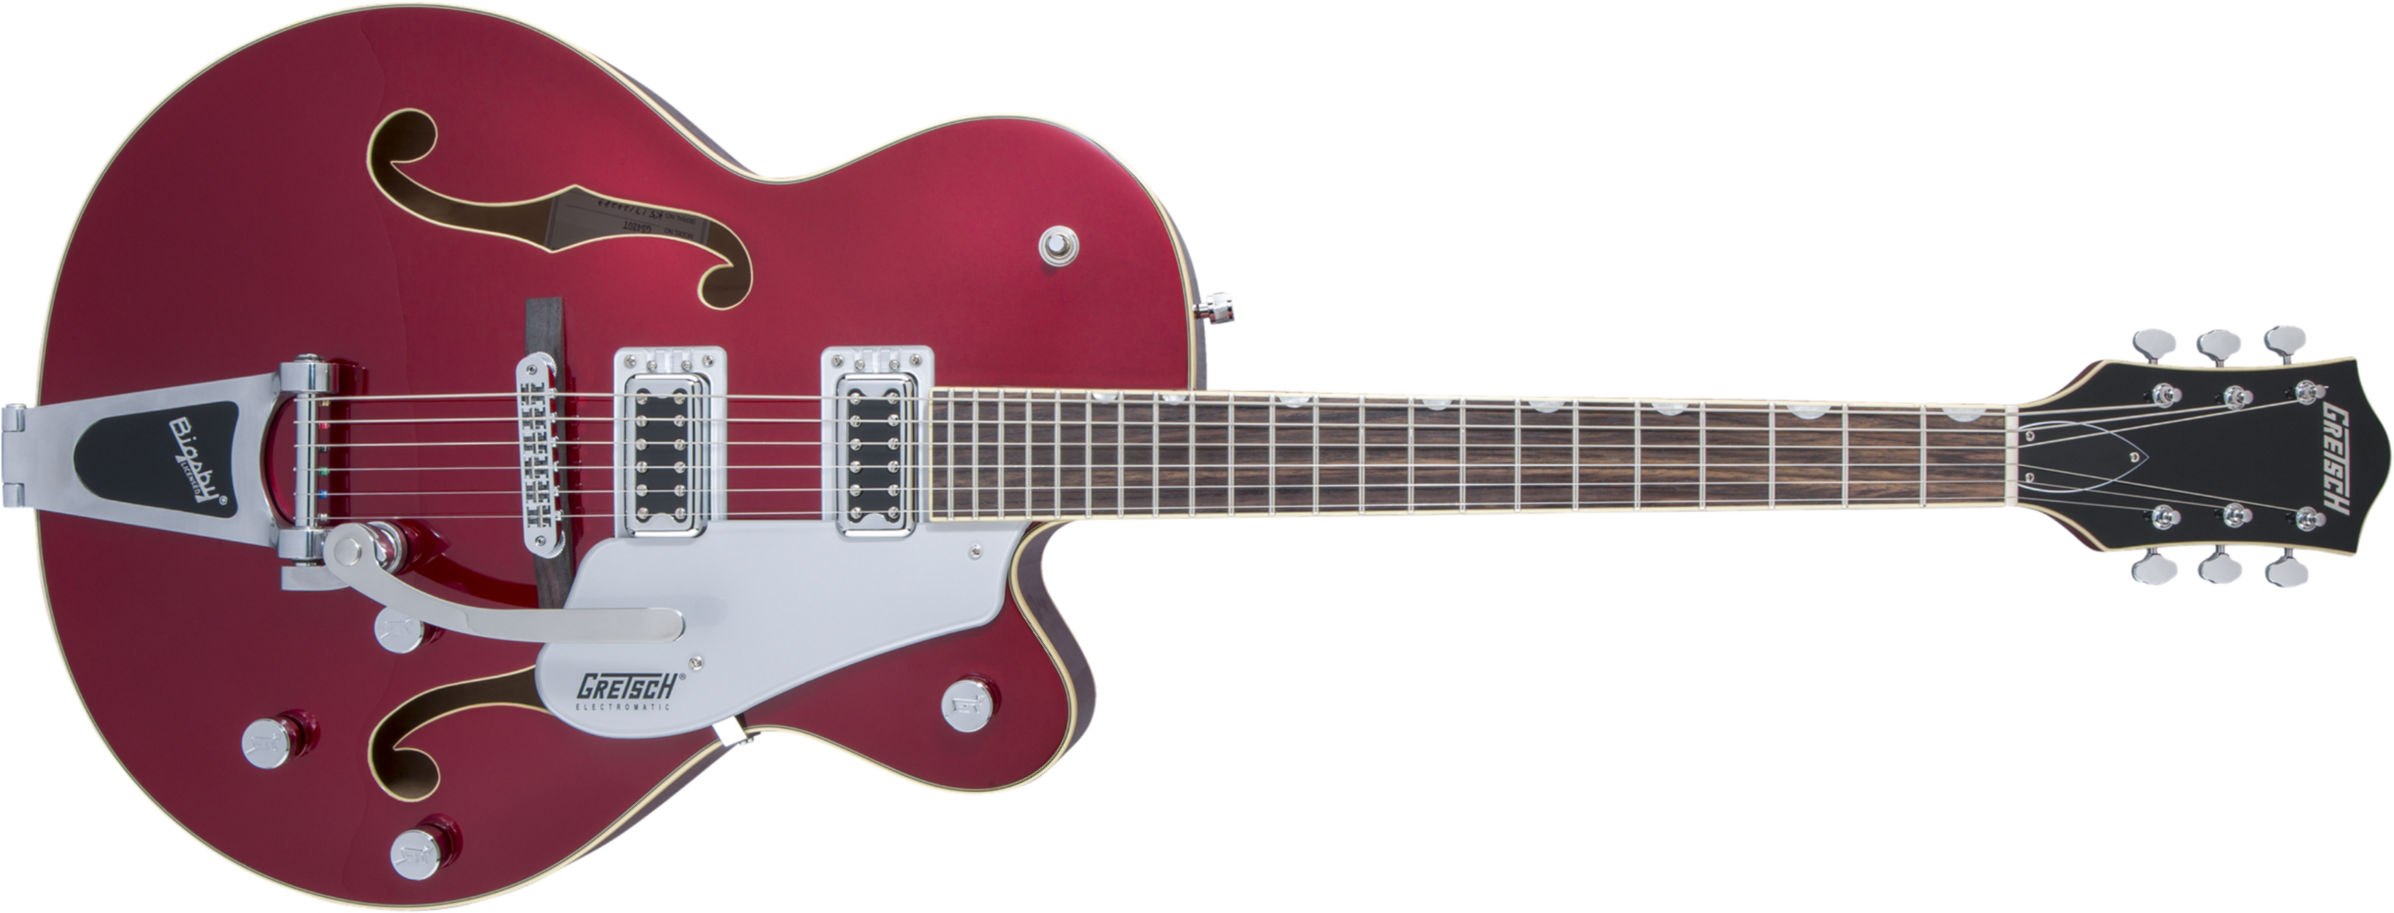 Gretsch G5420t Electromatic Hollow Body 2018 - Candy Apple Red - Semi-hollow electric guitar - Main picture